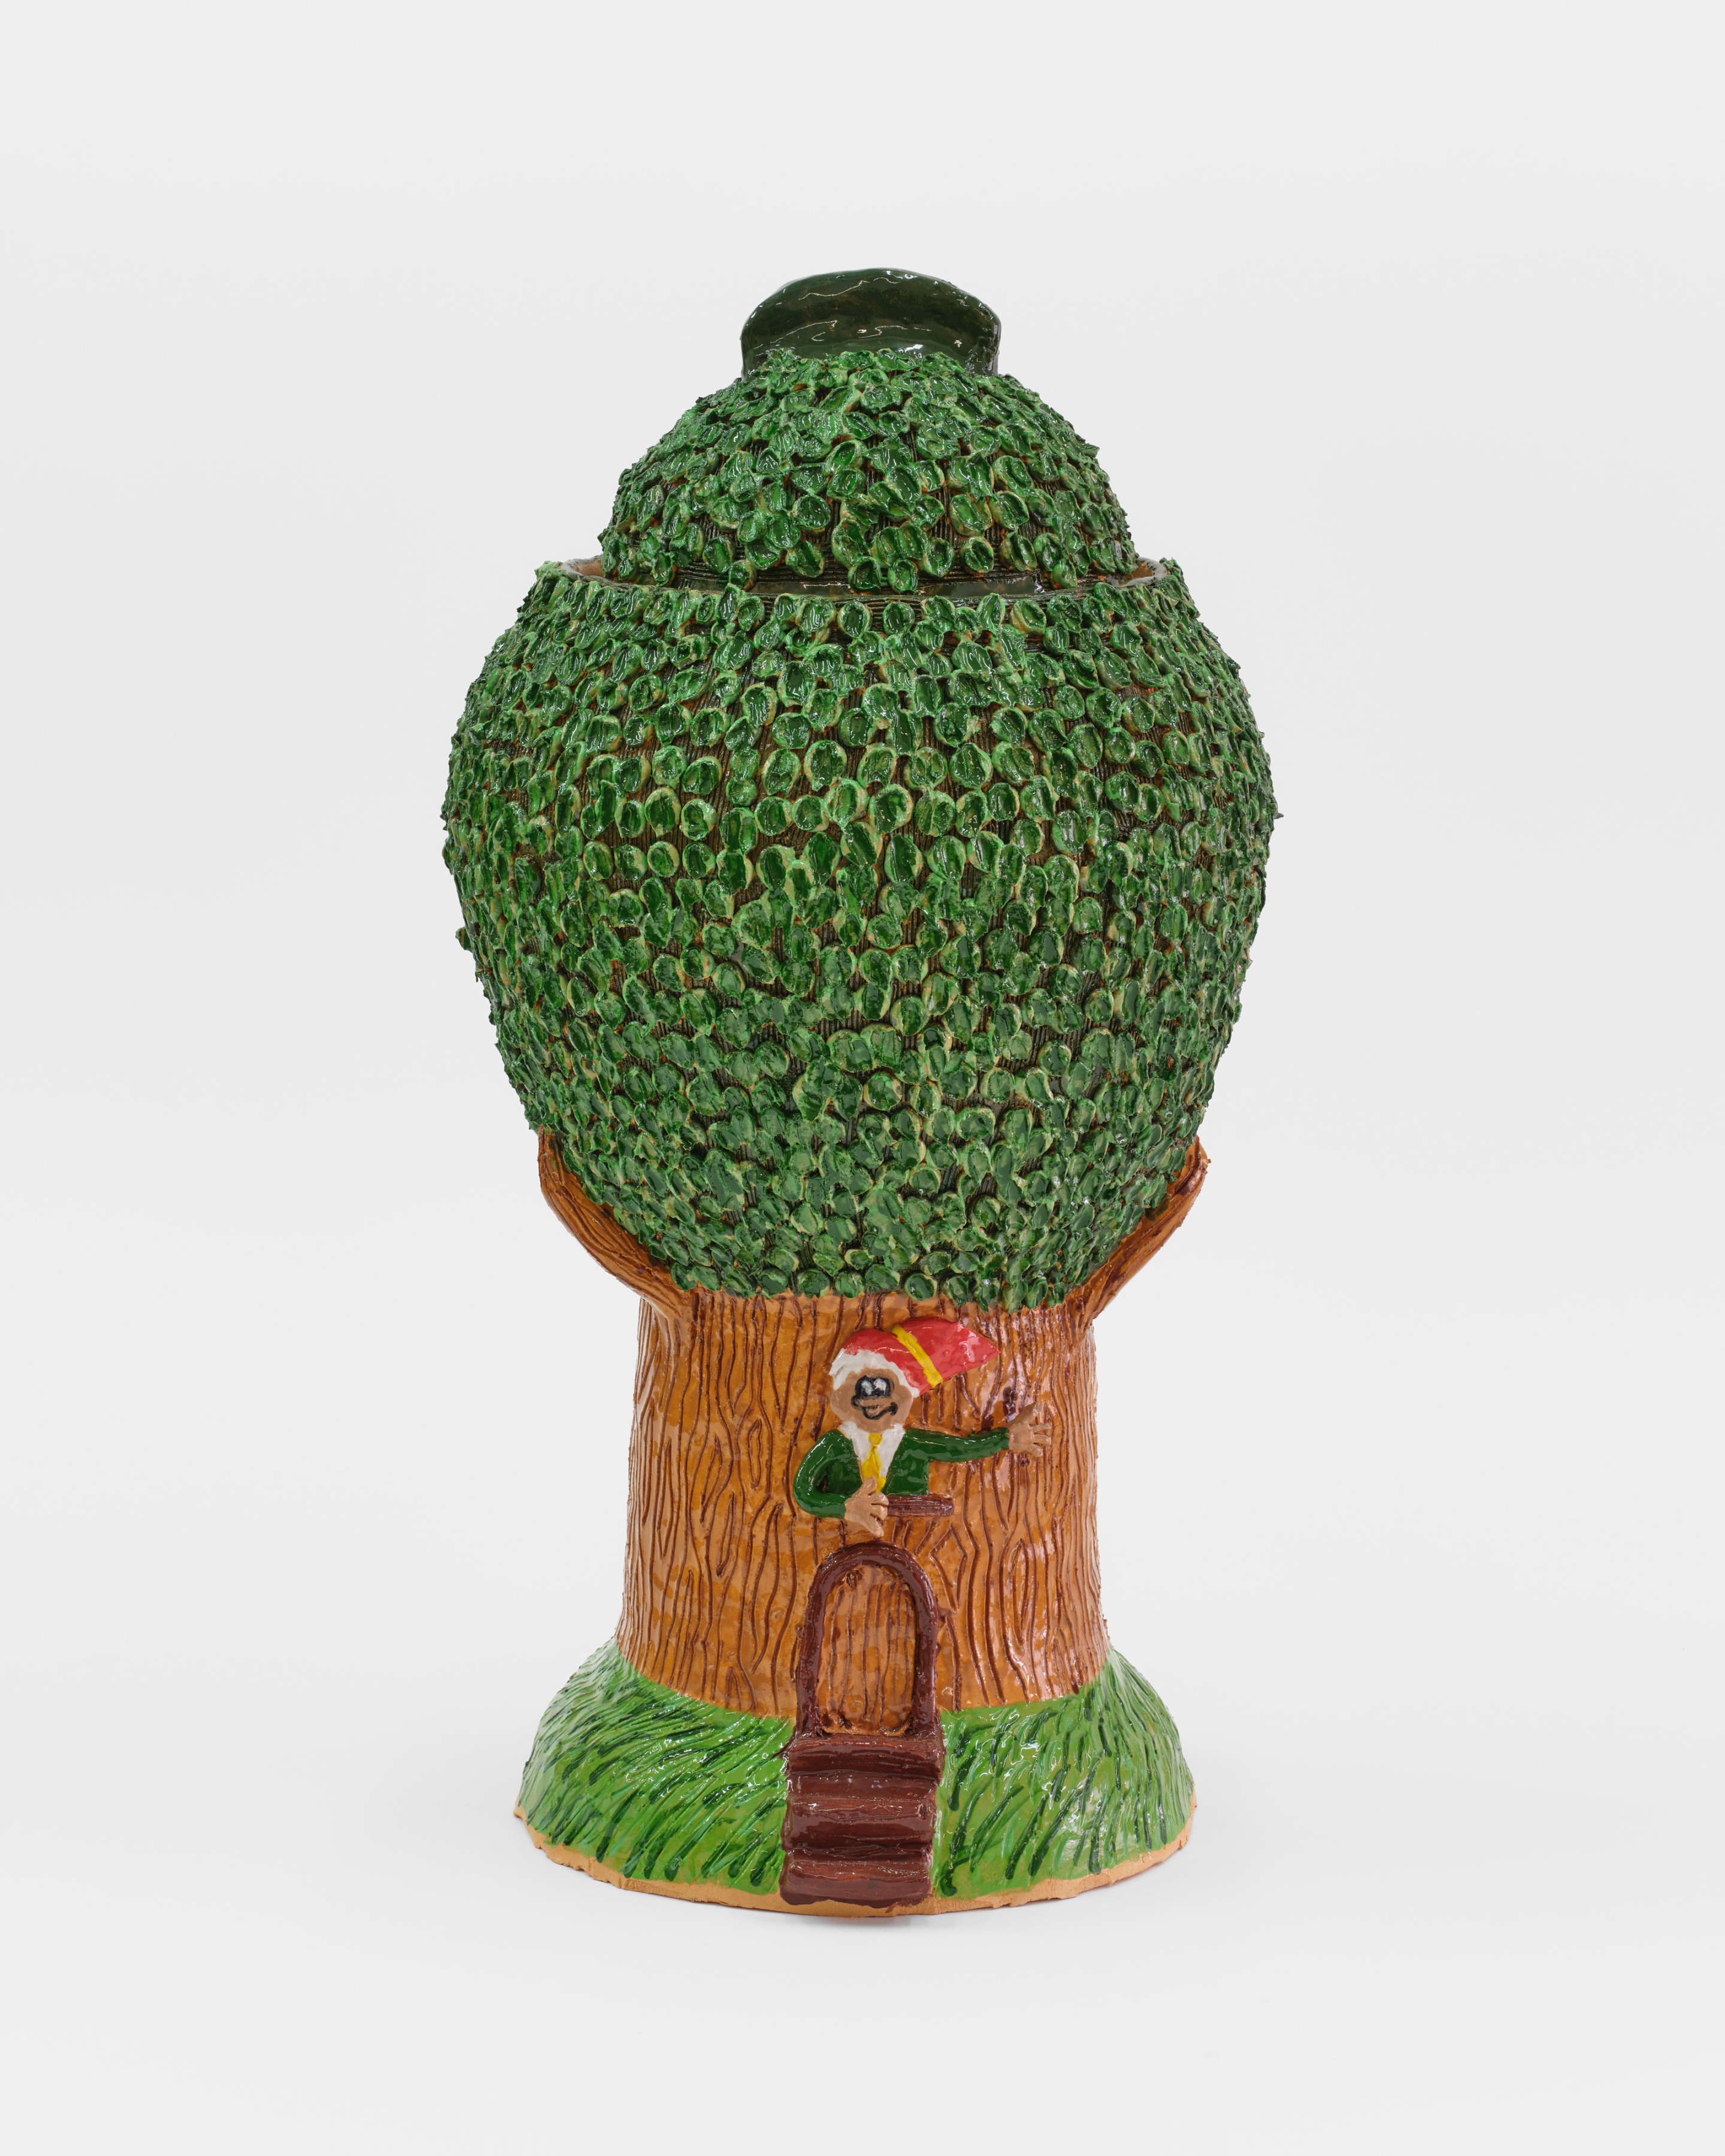 A ceramic sculpture of an elf welcoming the viewer to his house within a tree. 